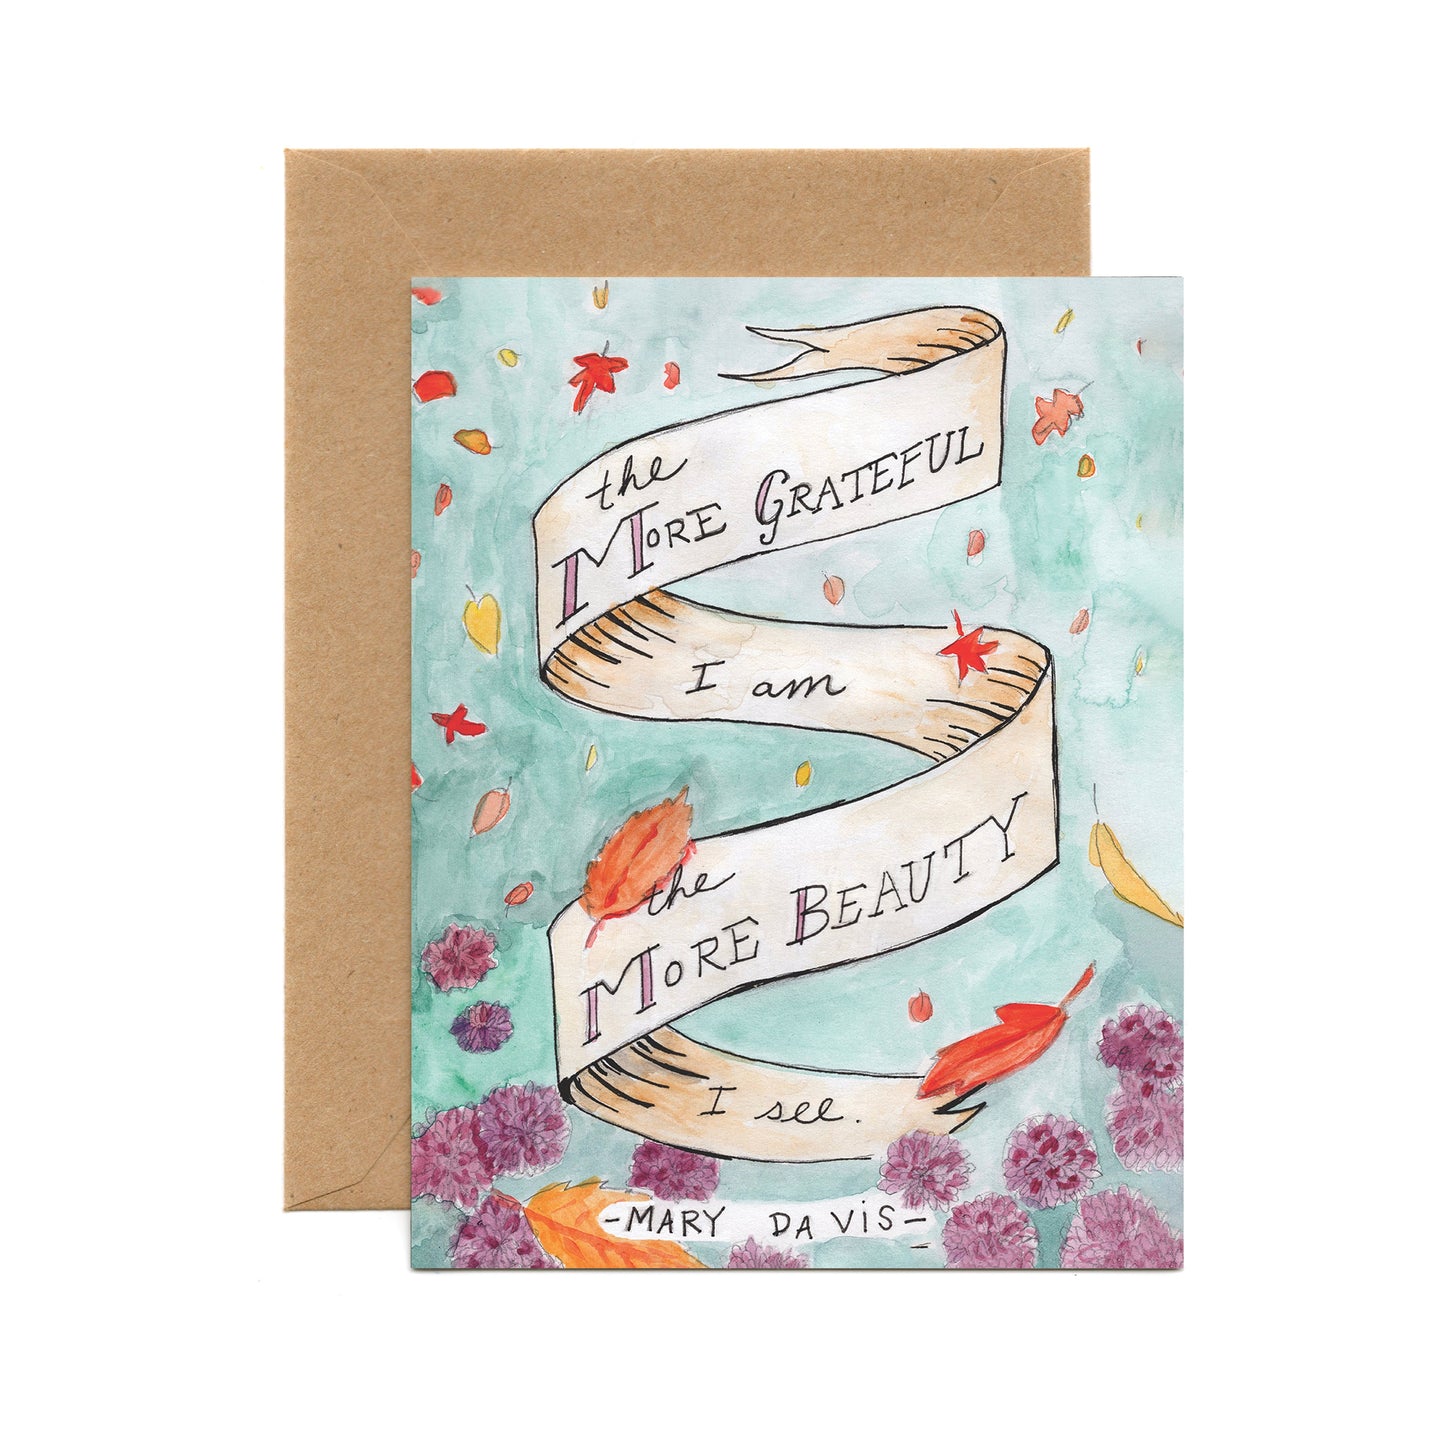 More Beauty (Single Card) A2 Card Tiny and Snail